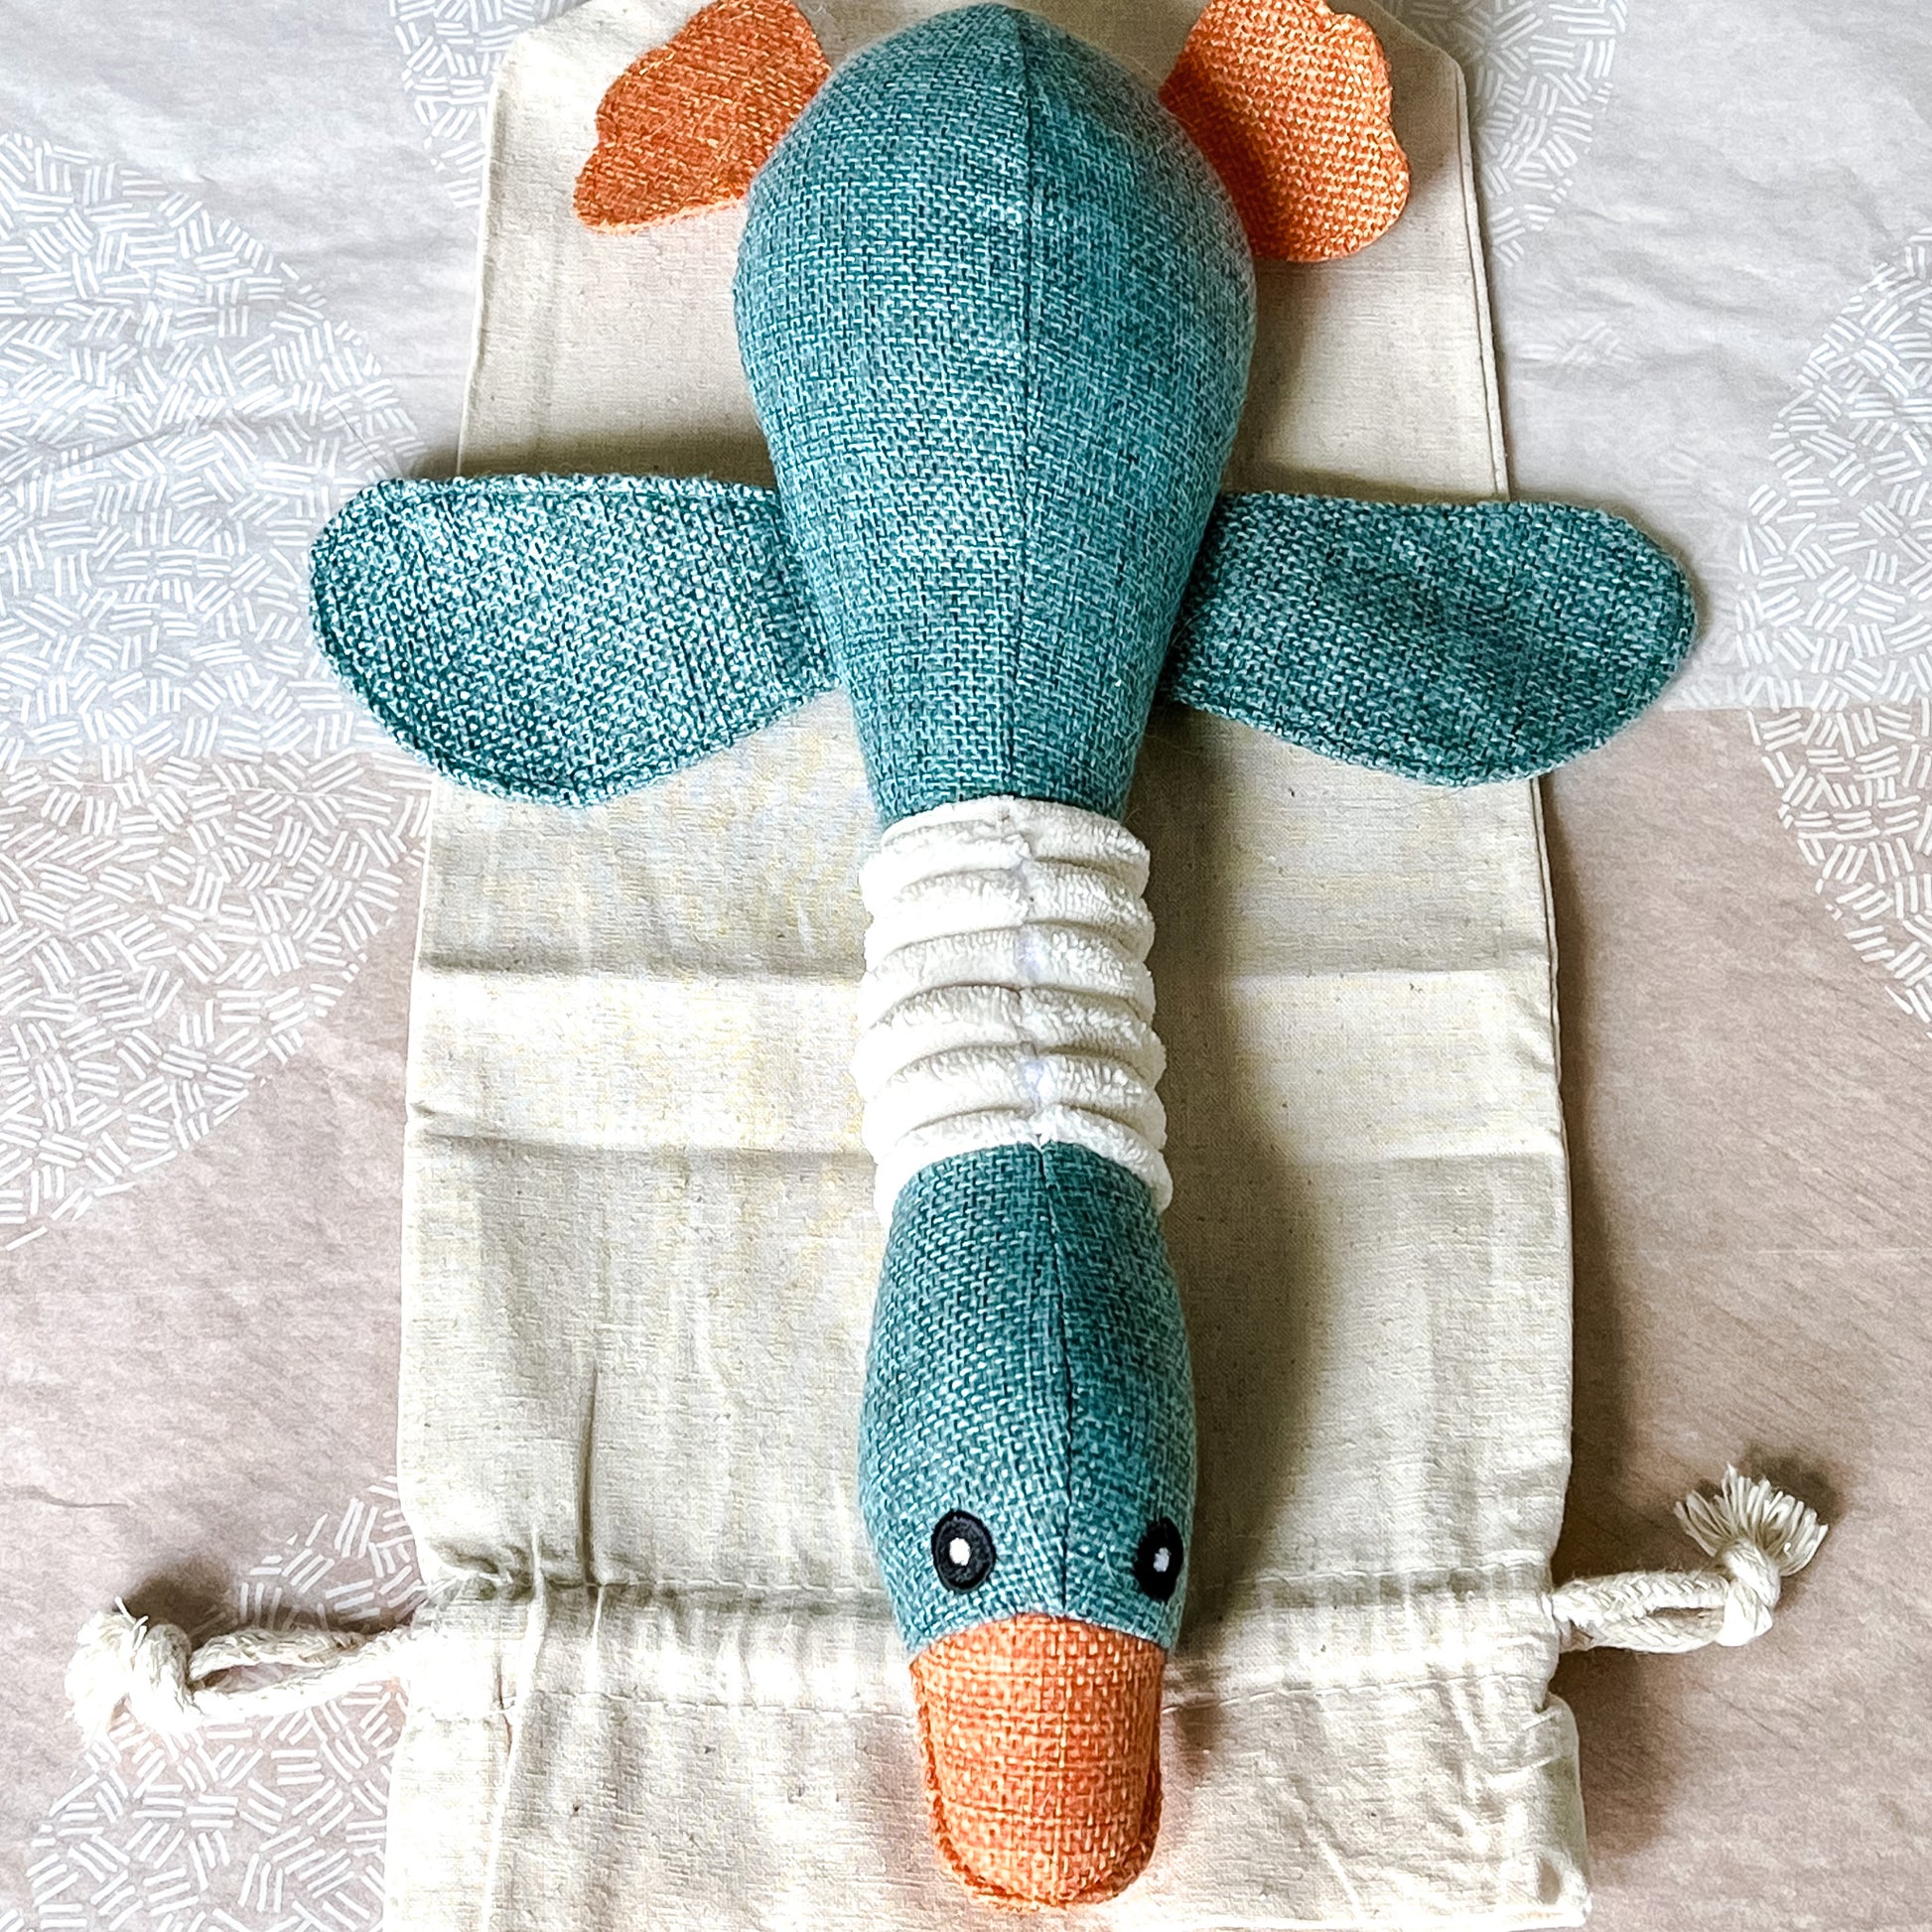 squeaky duck dog toy and cotton gift bag by Border Loves